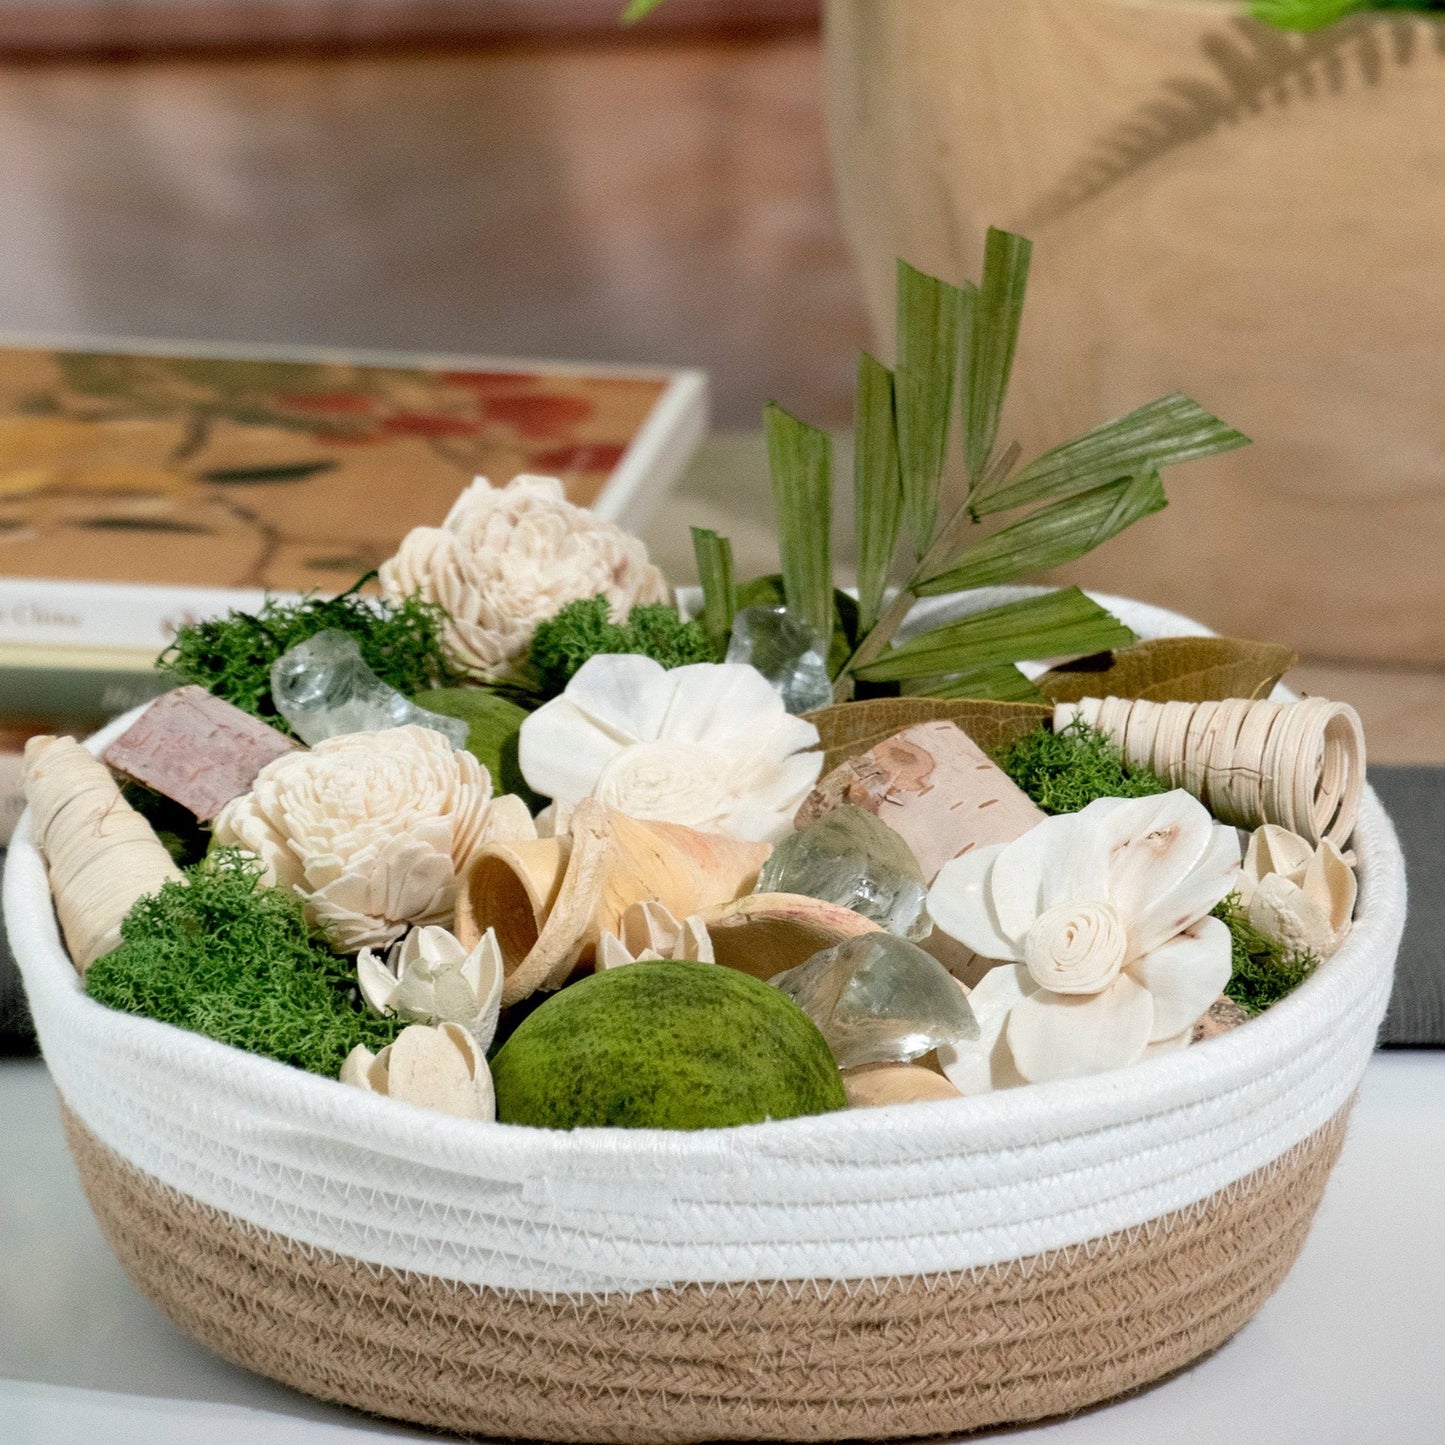 Gardens of Bali Potpourri by Andaluca Home